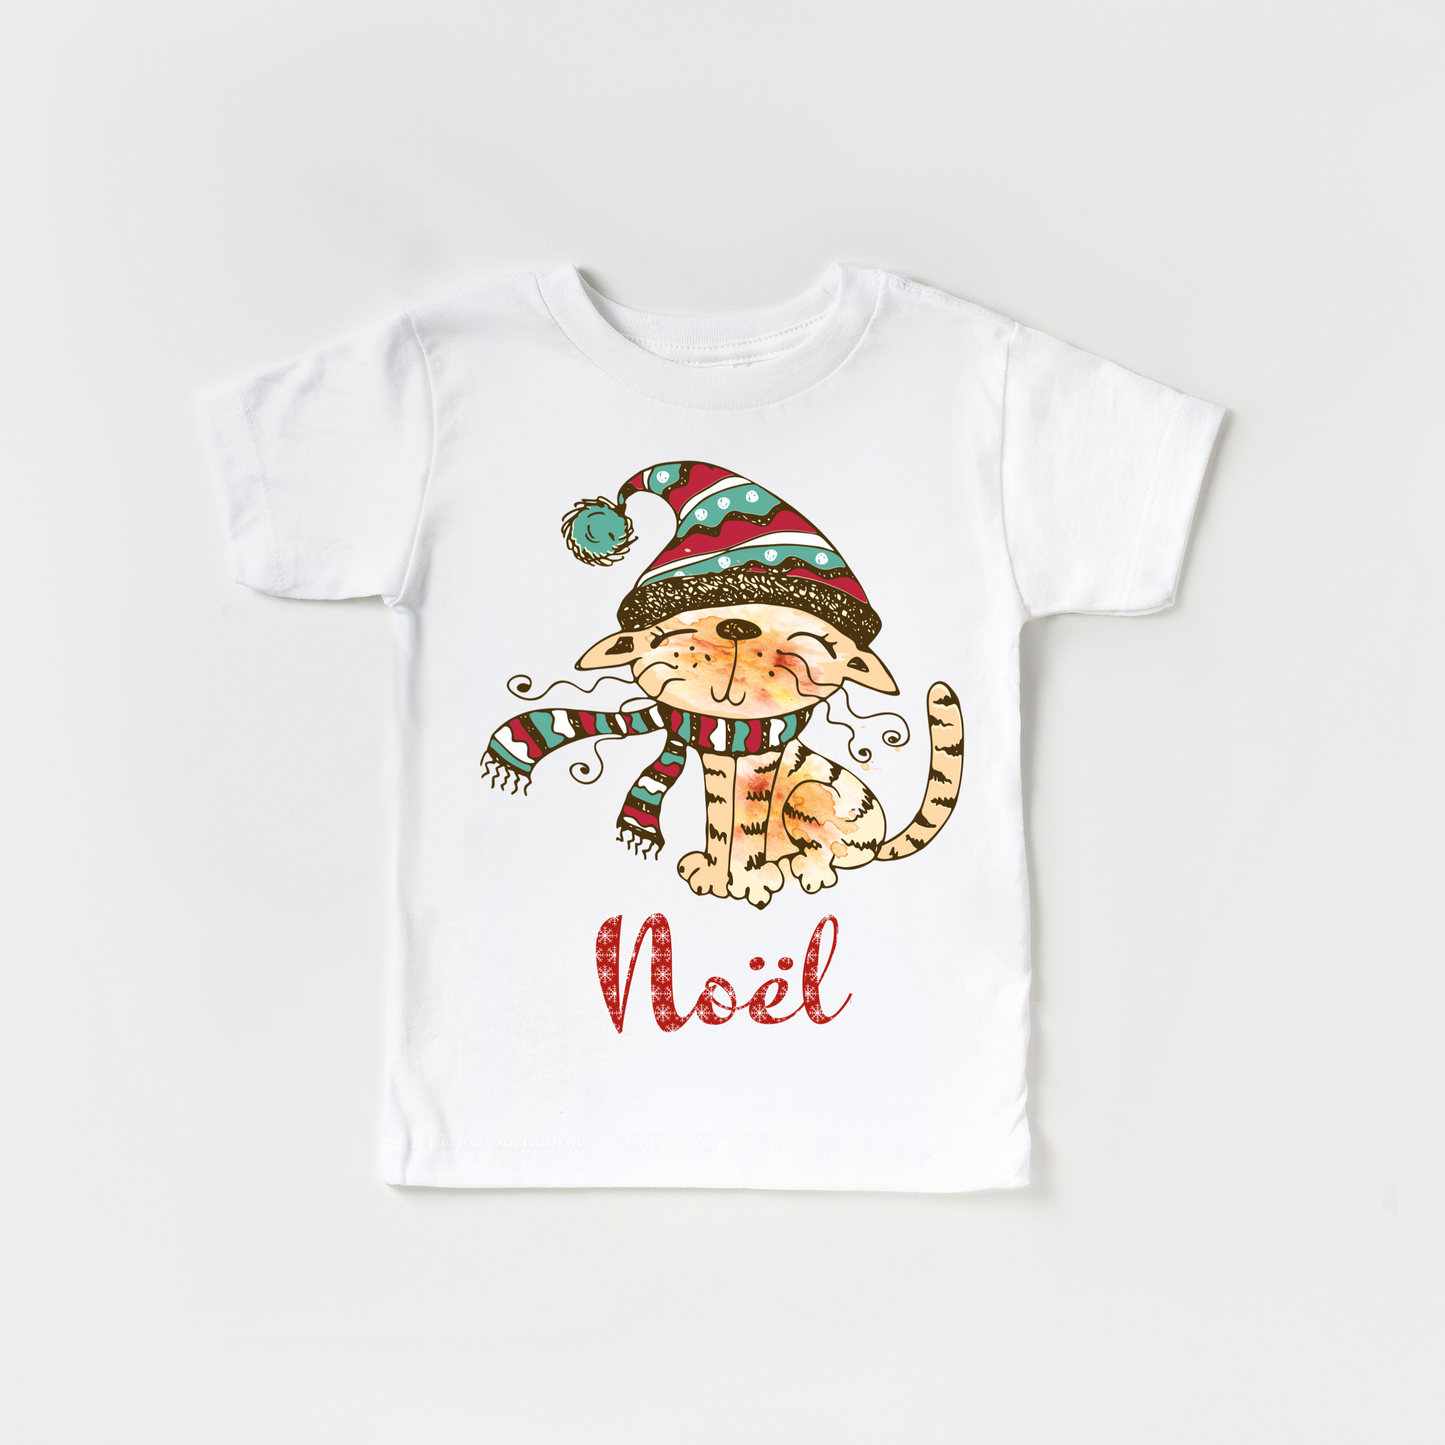 Cat with Scarf kids Christmas t shirts